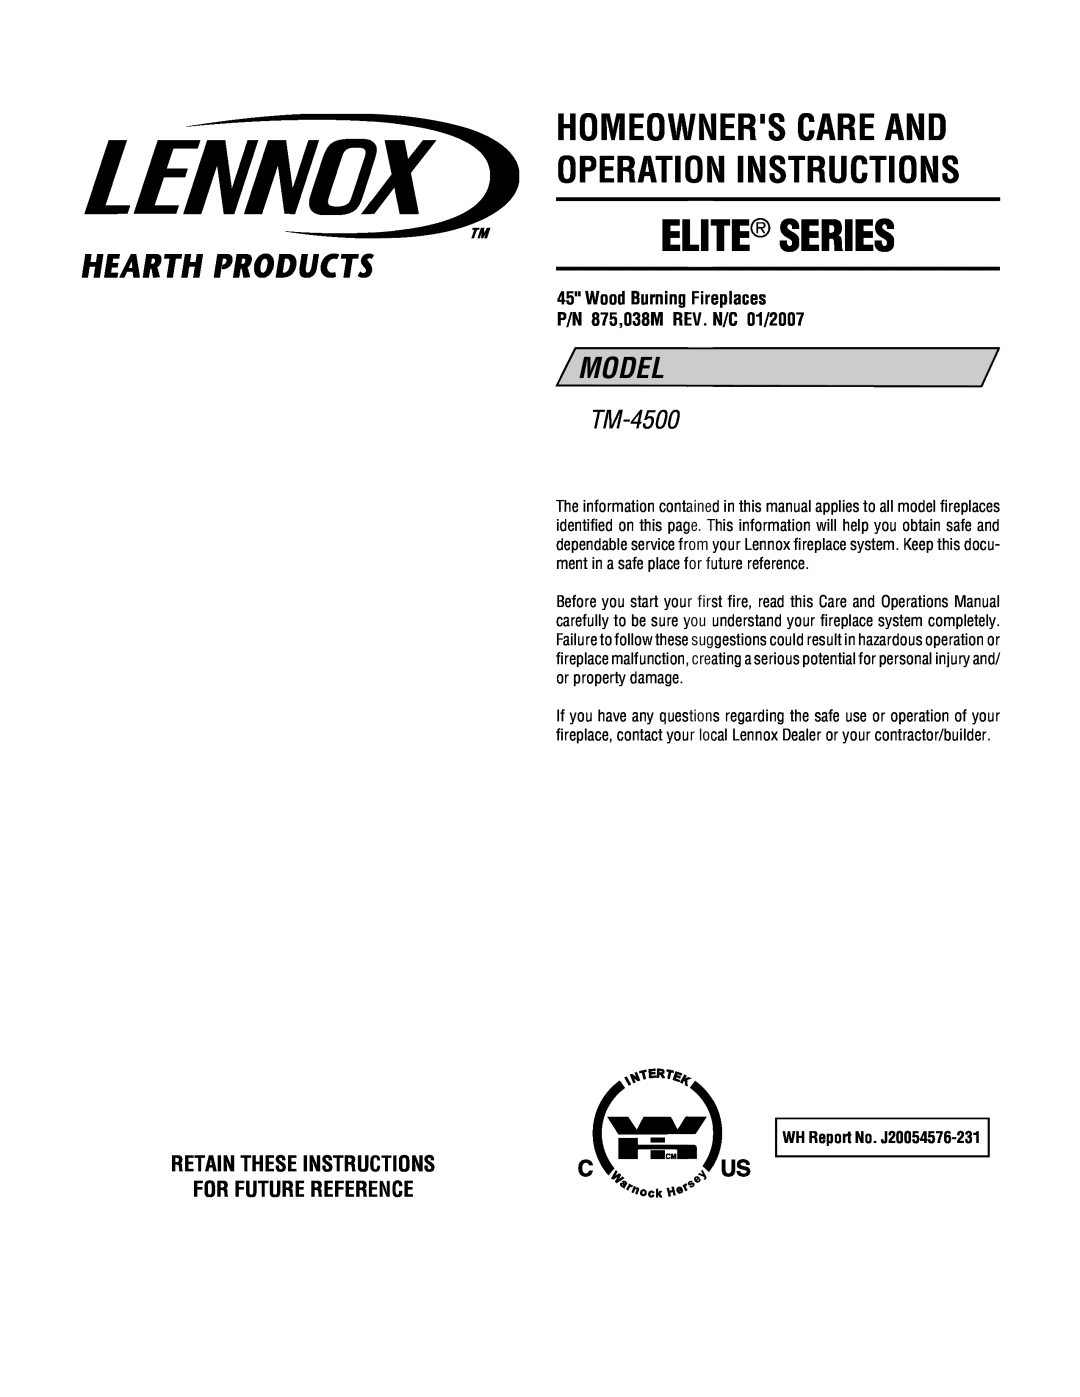 Lennox Hearth TM-4500 manual Retain These Instructions For Future Reference, Wood Burning Fireplaces, Elite Series, Model 